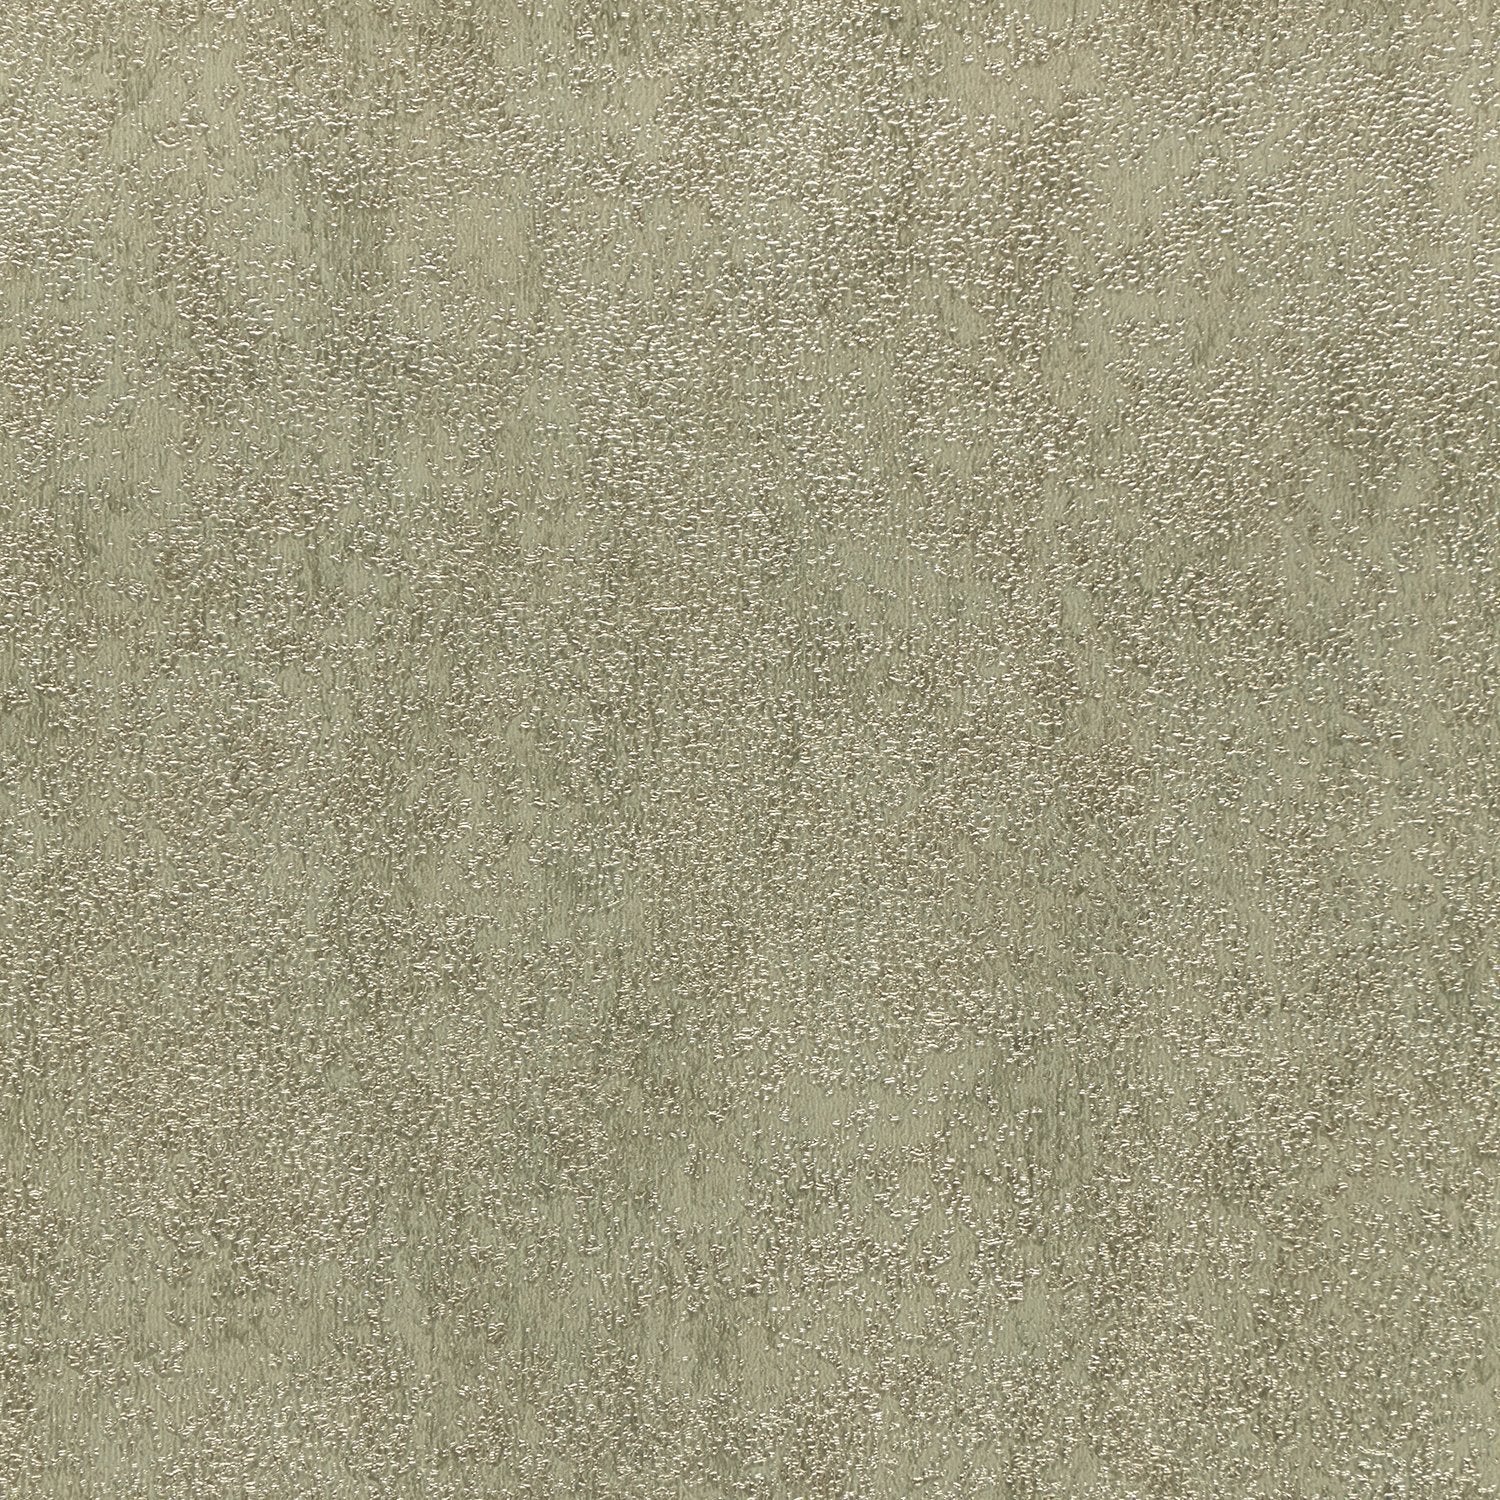 Patina Stone - Y47475 - Wallcovering - Vycon - Kube Contract